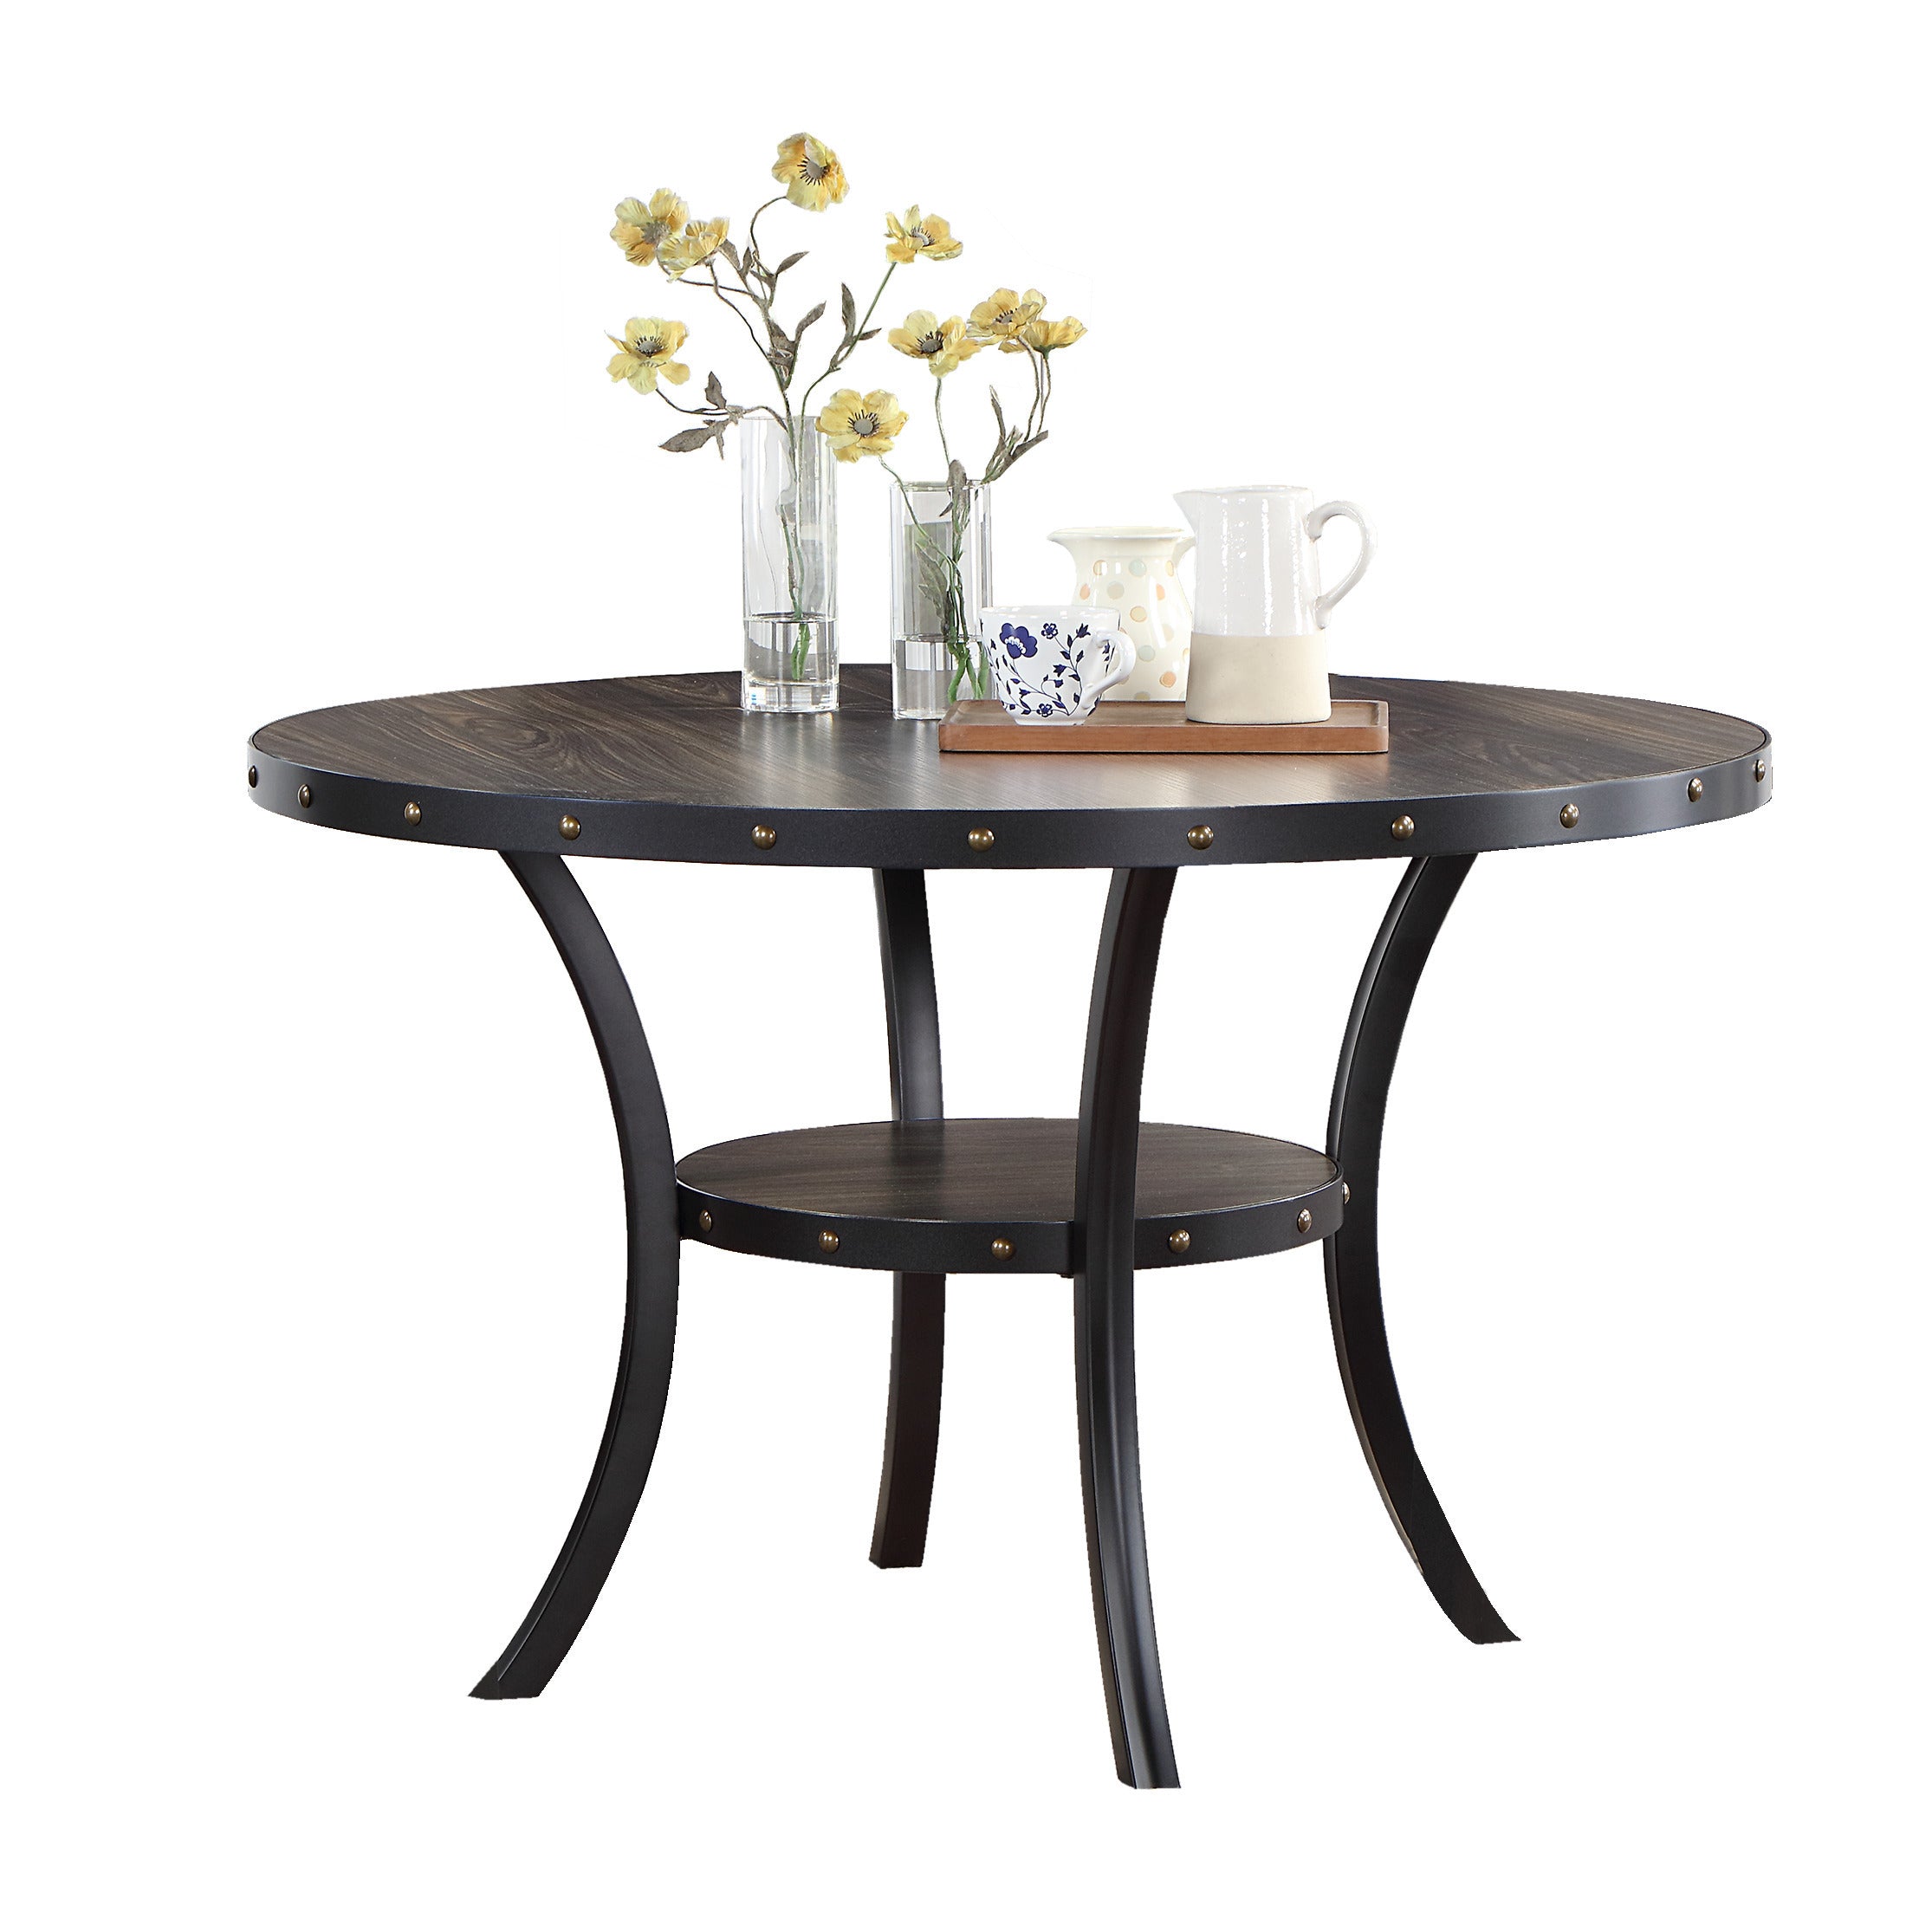 Dining Room Furniture Natural Wooden Round Dining Table 1pc Dining Table Only Nailheads and Storage Shelve